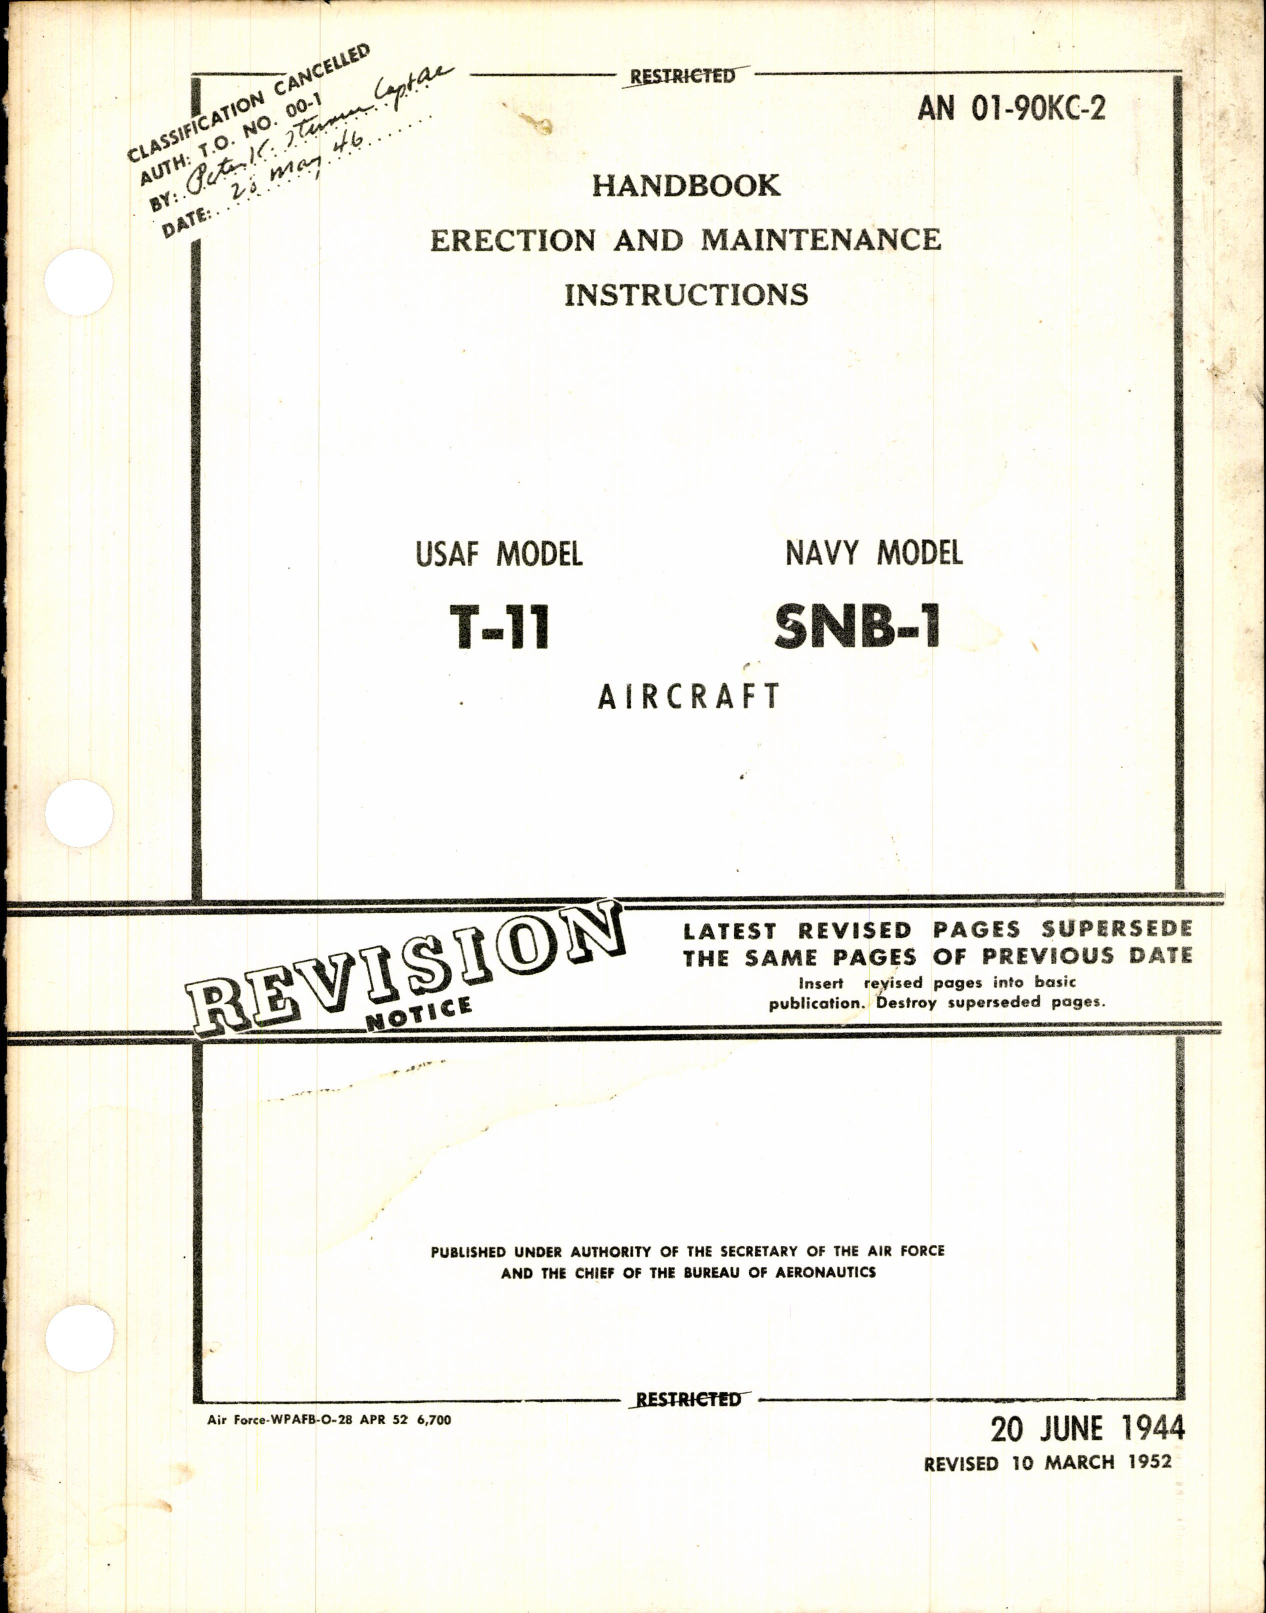 Sample page 1 from AirCorps Library document: Erection and Maintenance Instructions for T-11